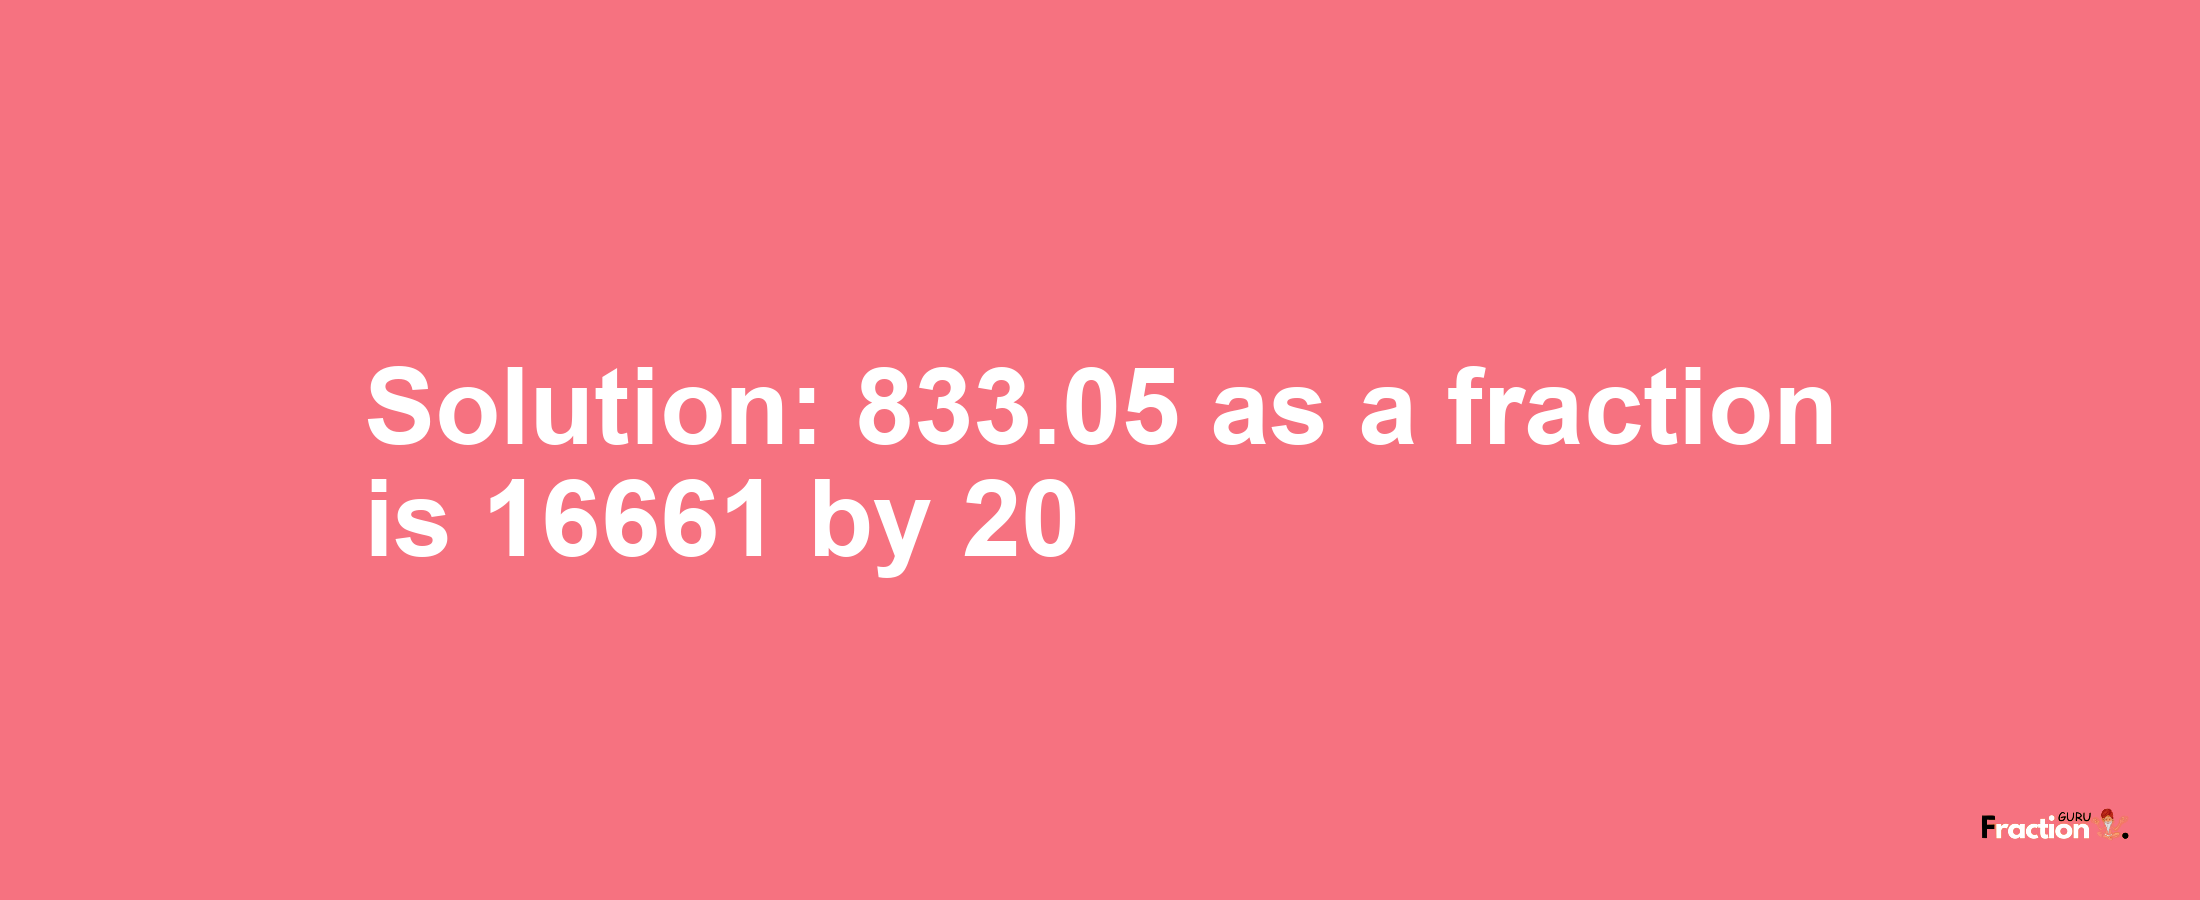 Solution:833.05 as a fraction is 16661/20